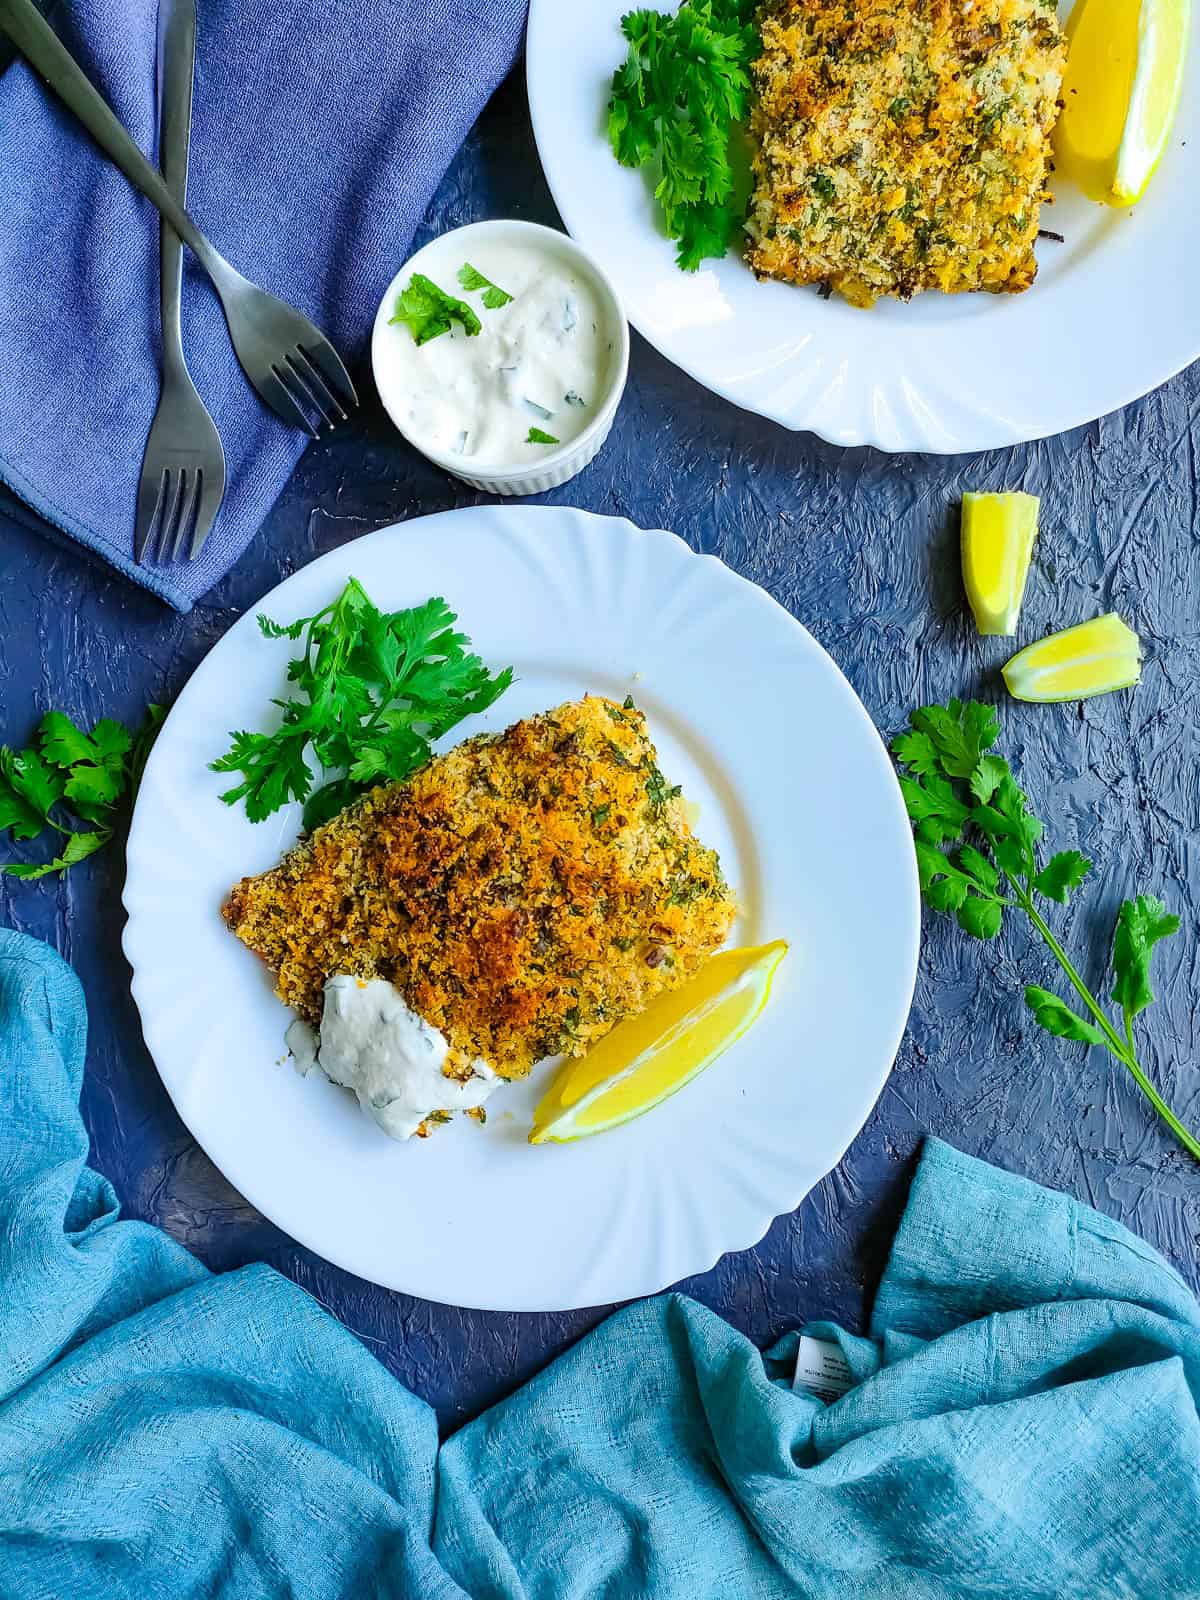 Baked panko cod served with yogurt sauce and garnished with parsley and lemon slices in 2 white plates.